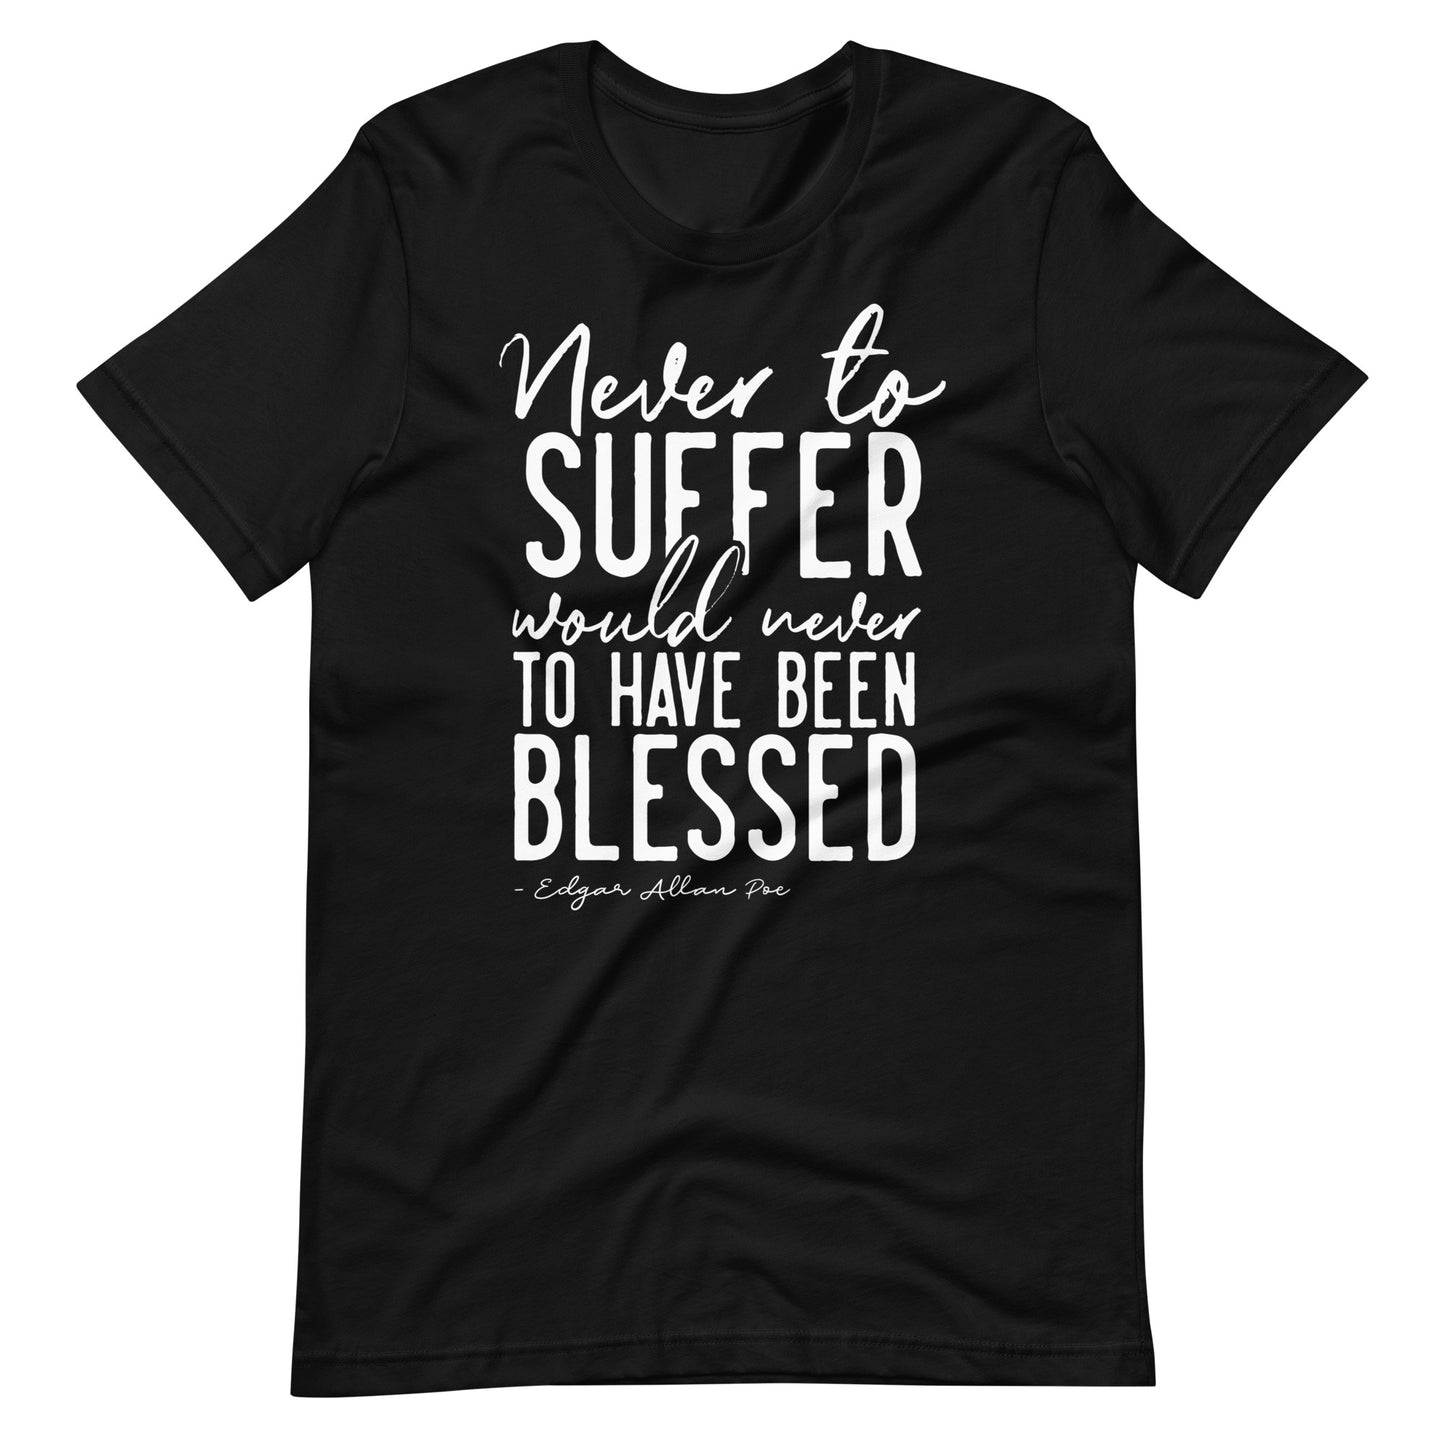 Never to Suffer Edgar Allan Poe Quote - Men's t-shirt - Black Front